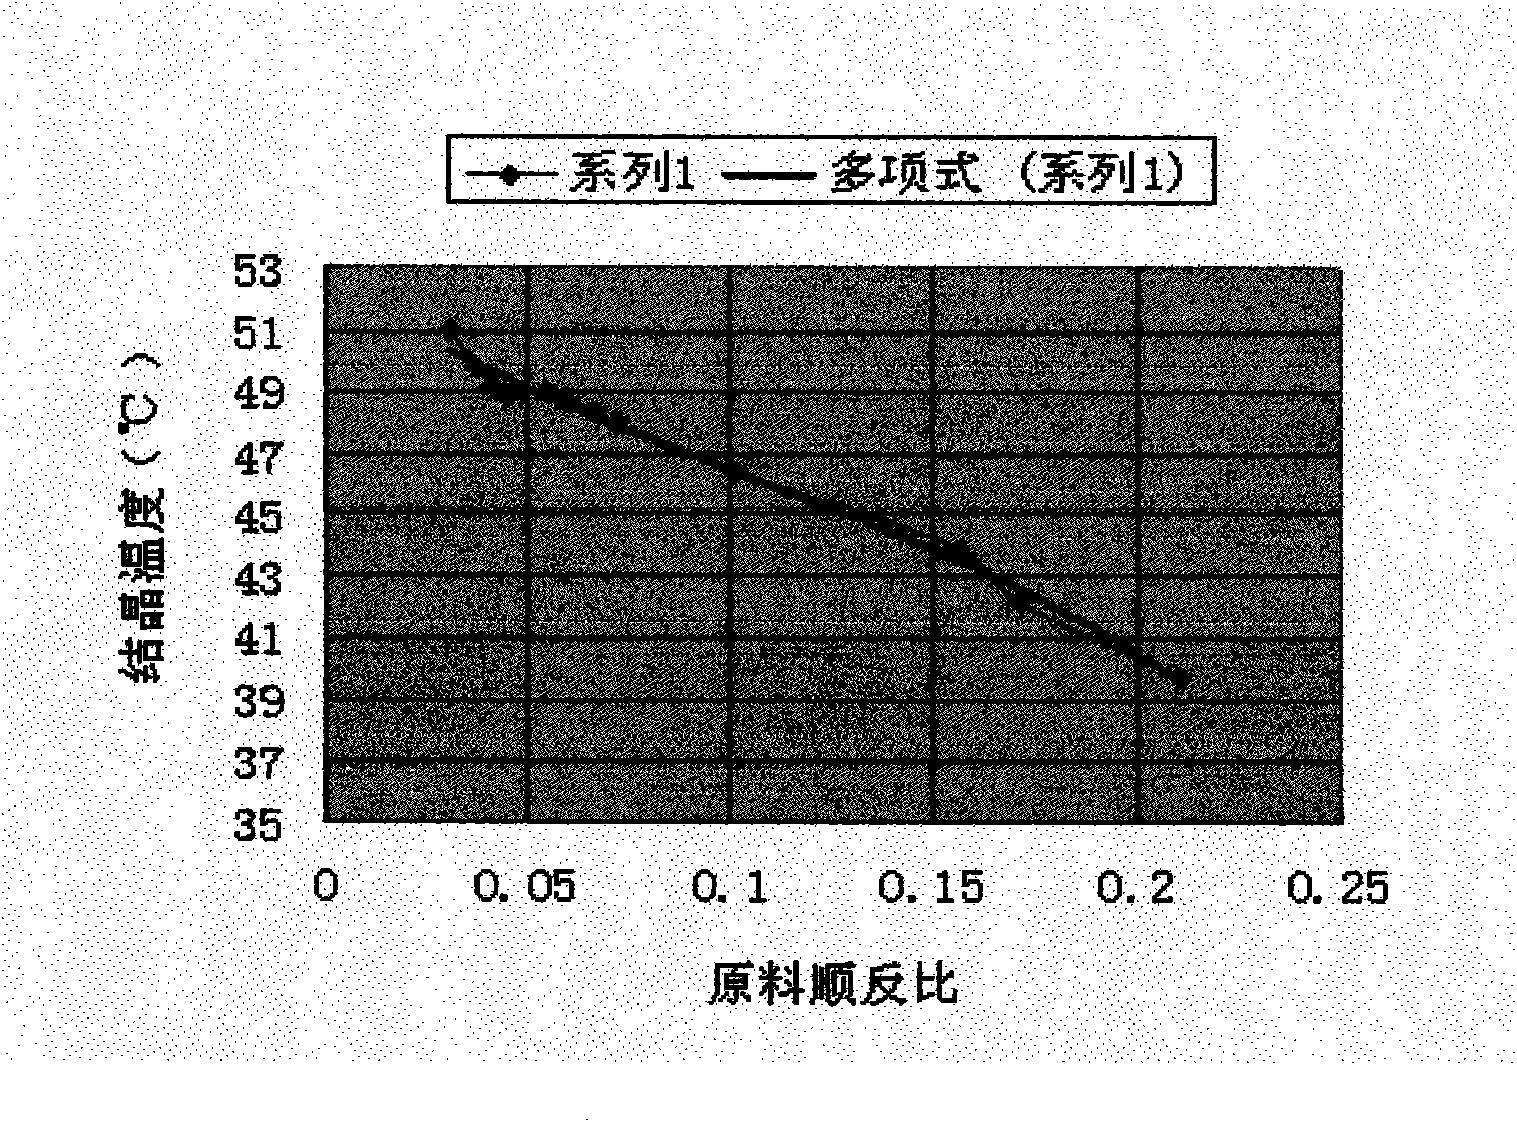 Method for manufacturing rich reverse type first chrysanthemic acid